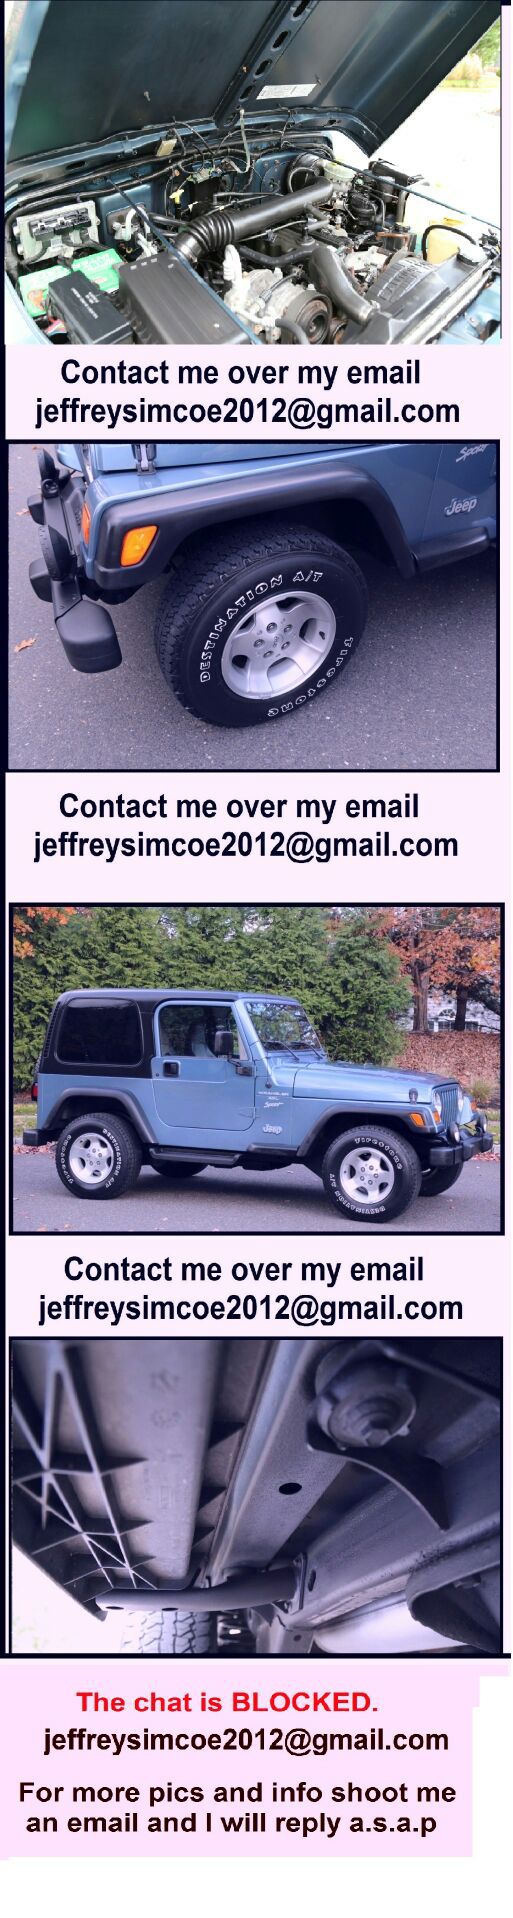 ==+ 1999 jeep wrangler sport= title in hand. "